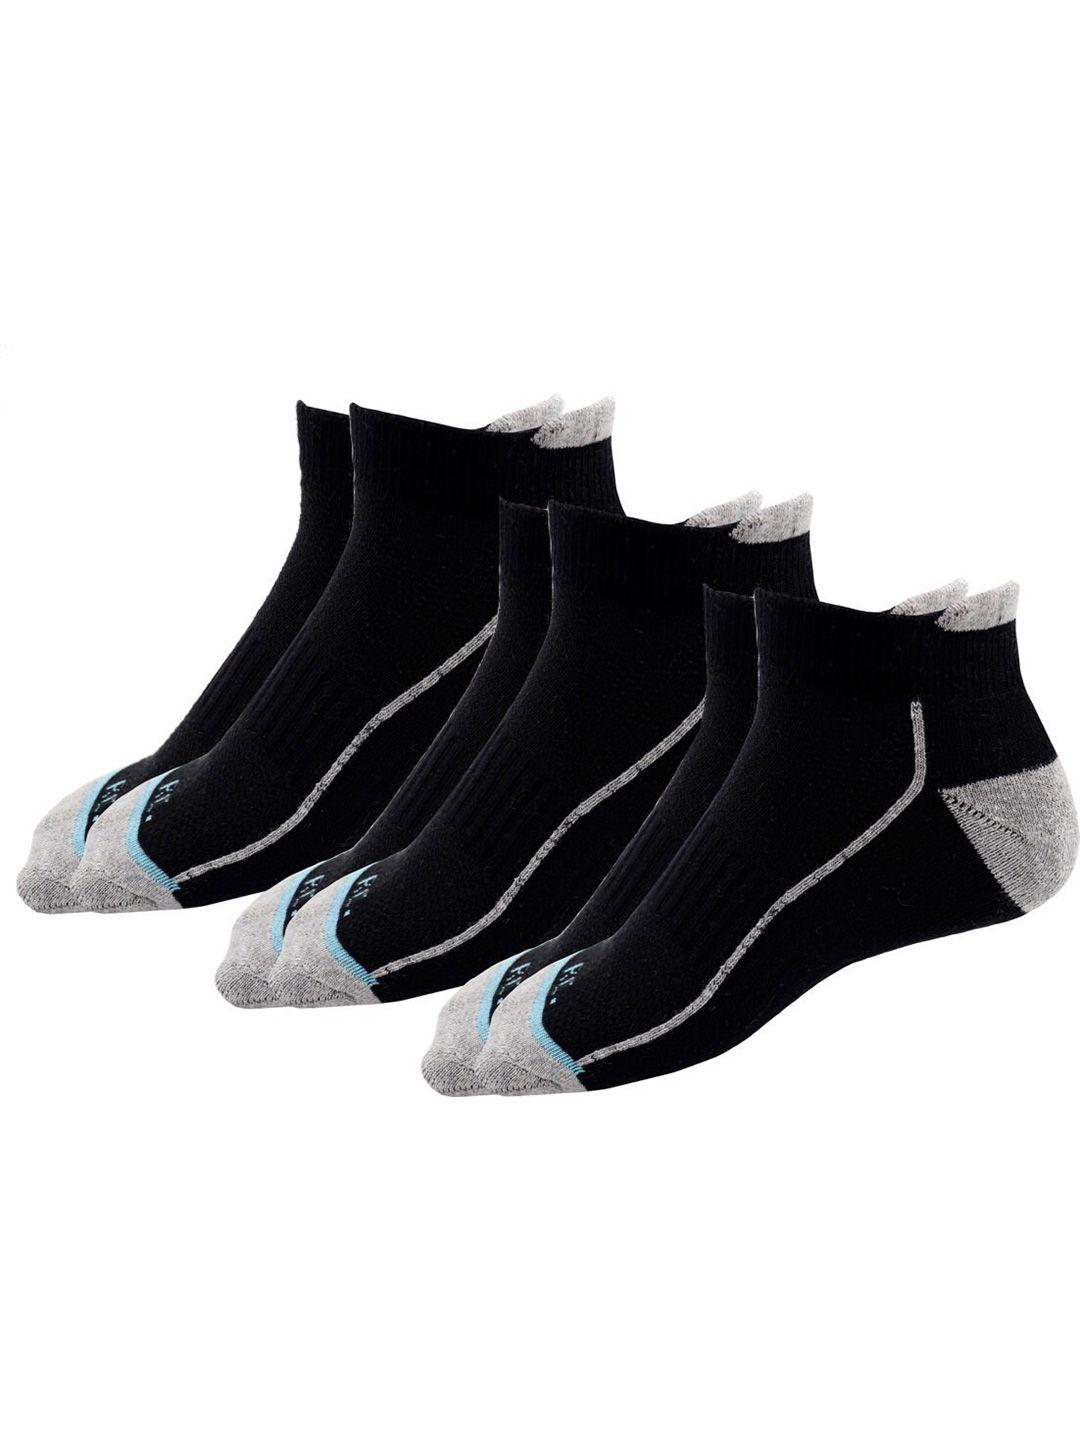 rc.-royal-class-men-pack-of-3-patterned-ankle-length-sports-socks